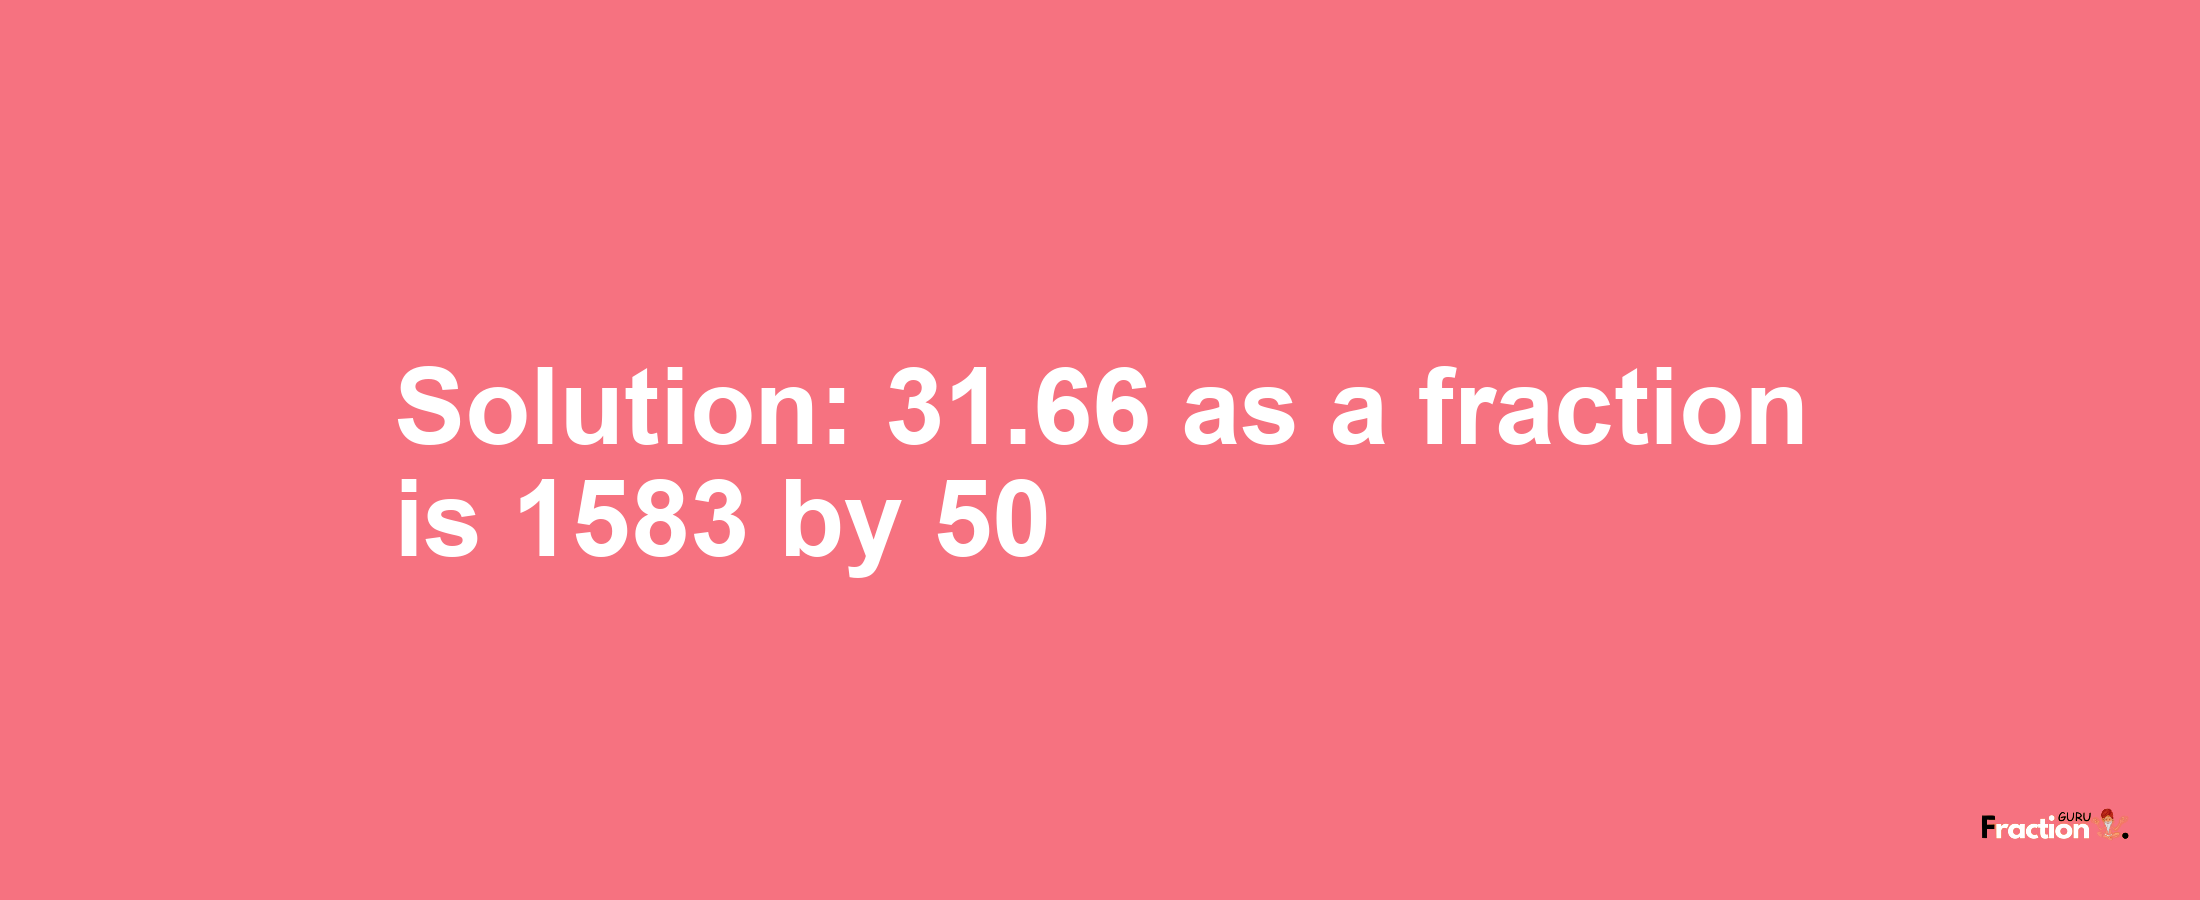 Solution:31.66 as a fraction is 1583/50